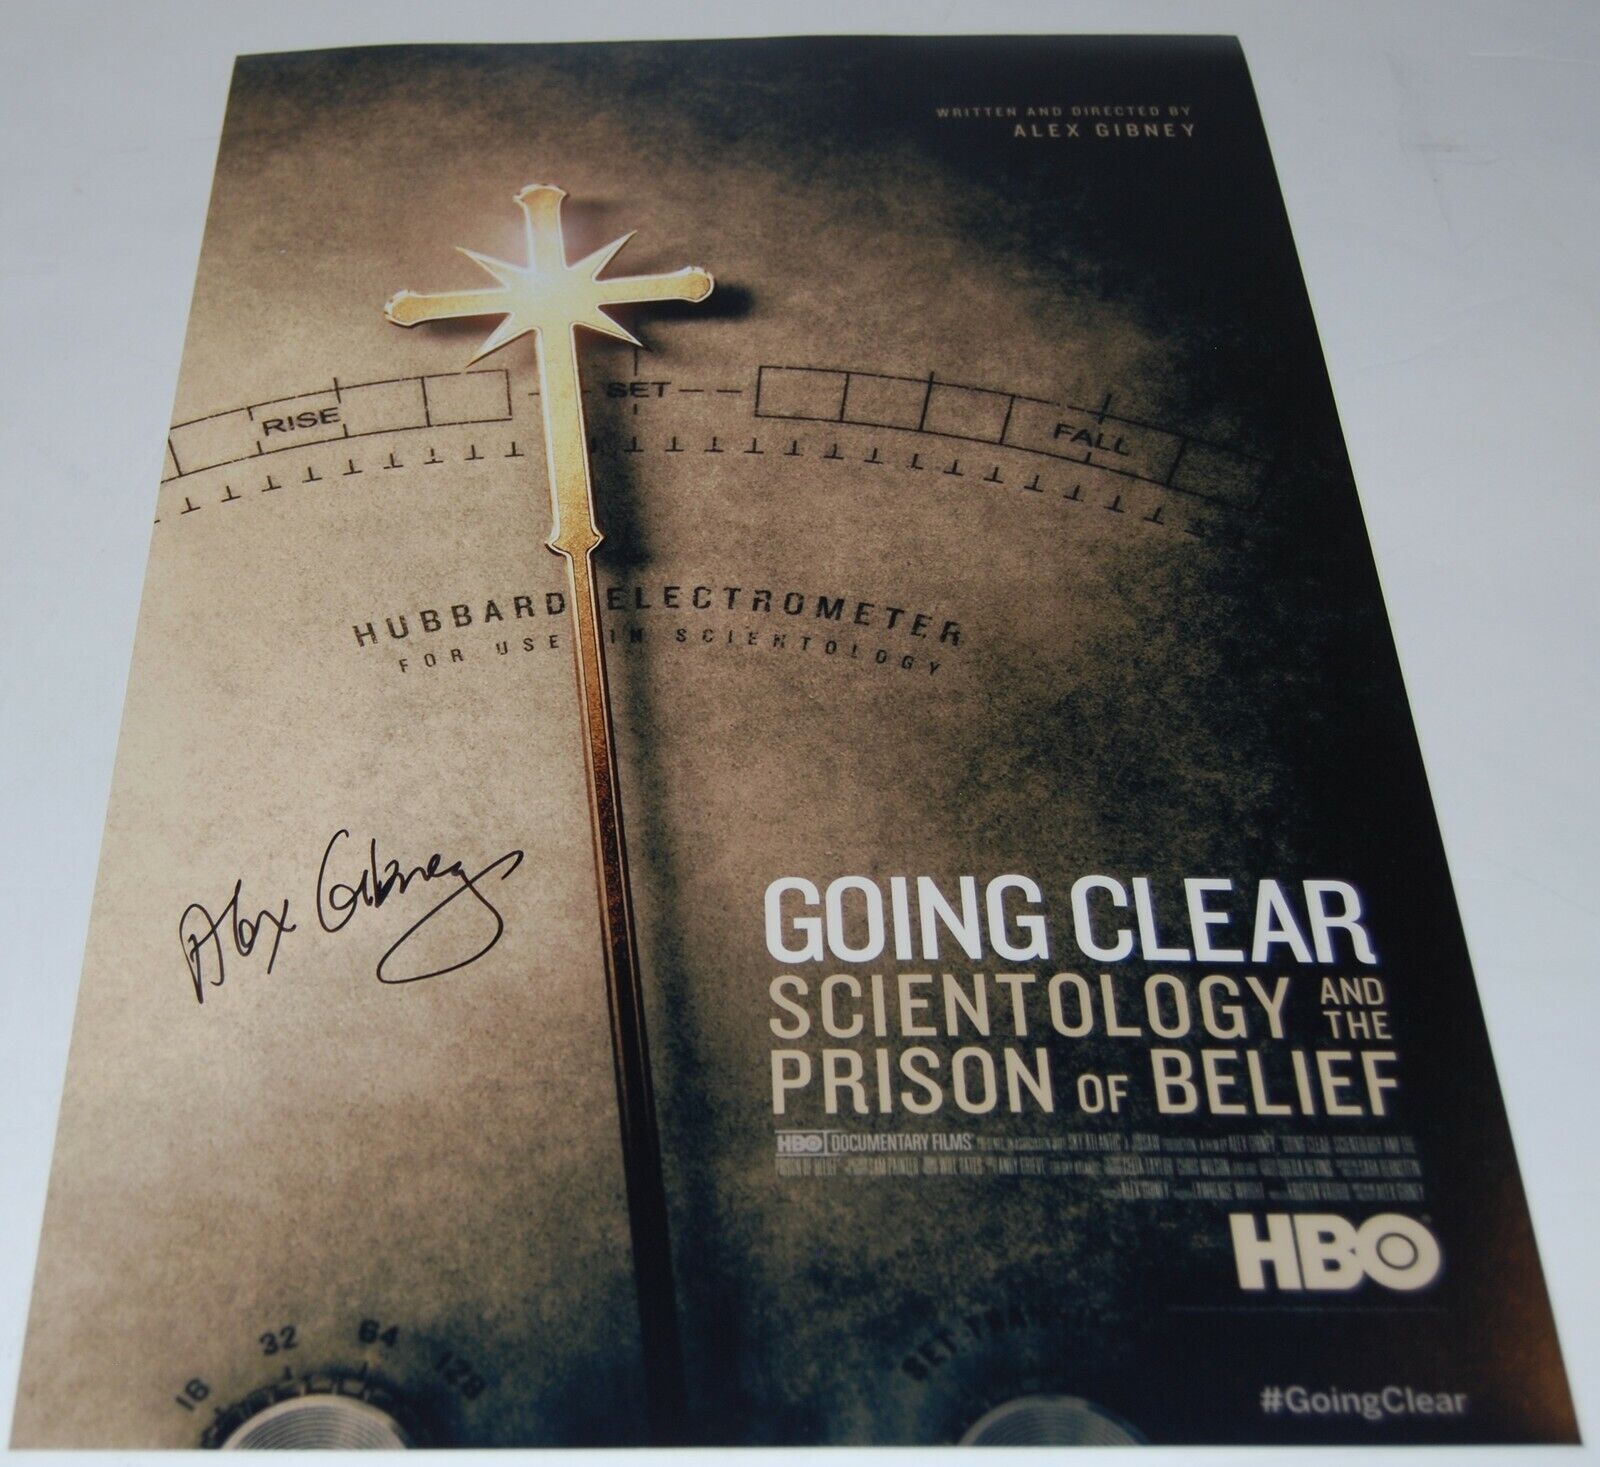 ALEX GIBNEY signed (GOING CLEAR SCIENTOLOGY & PRISON) 12X18 movie poster W/COA B